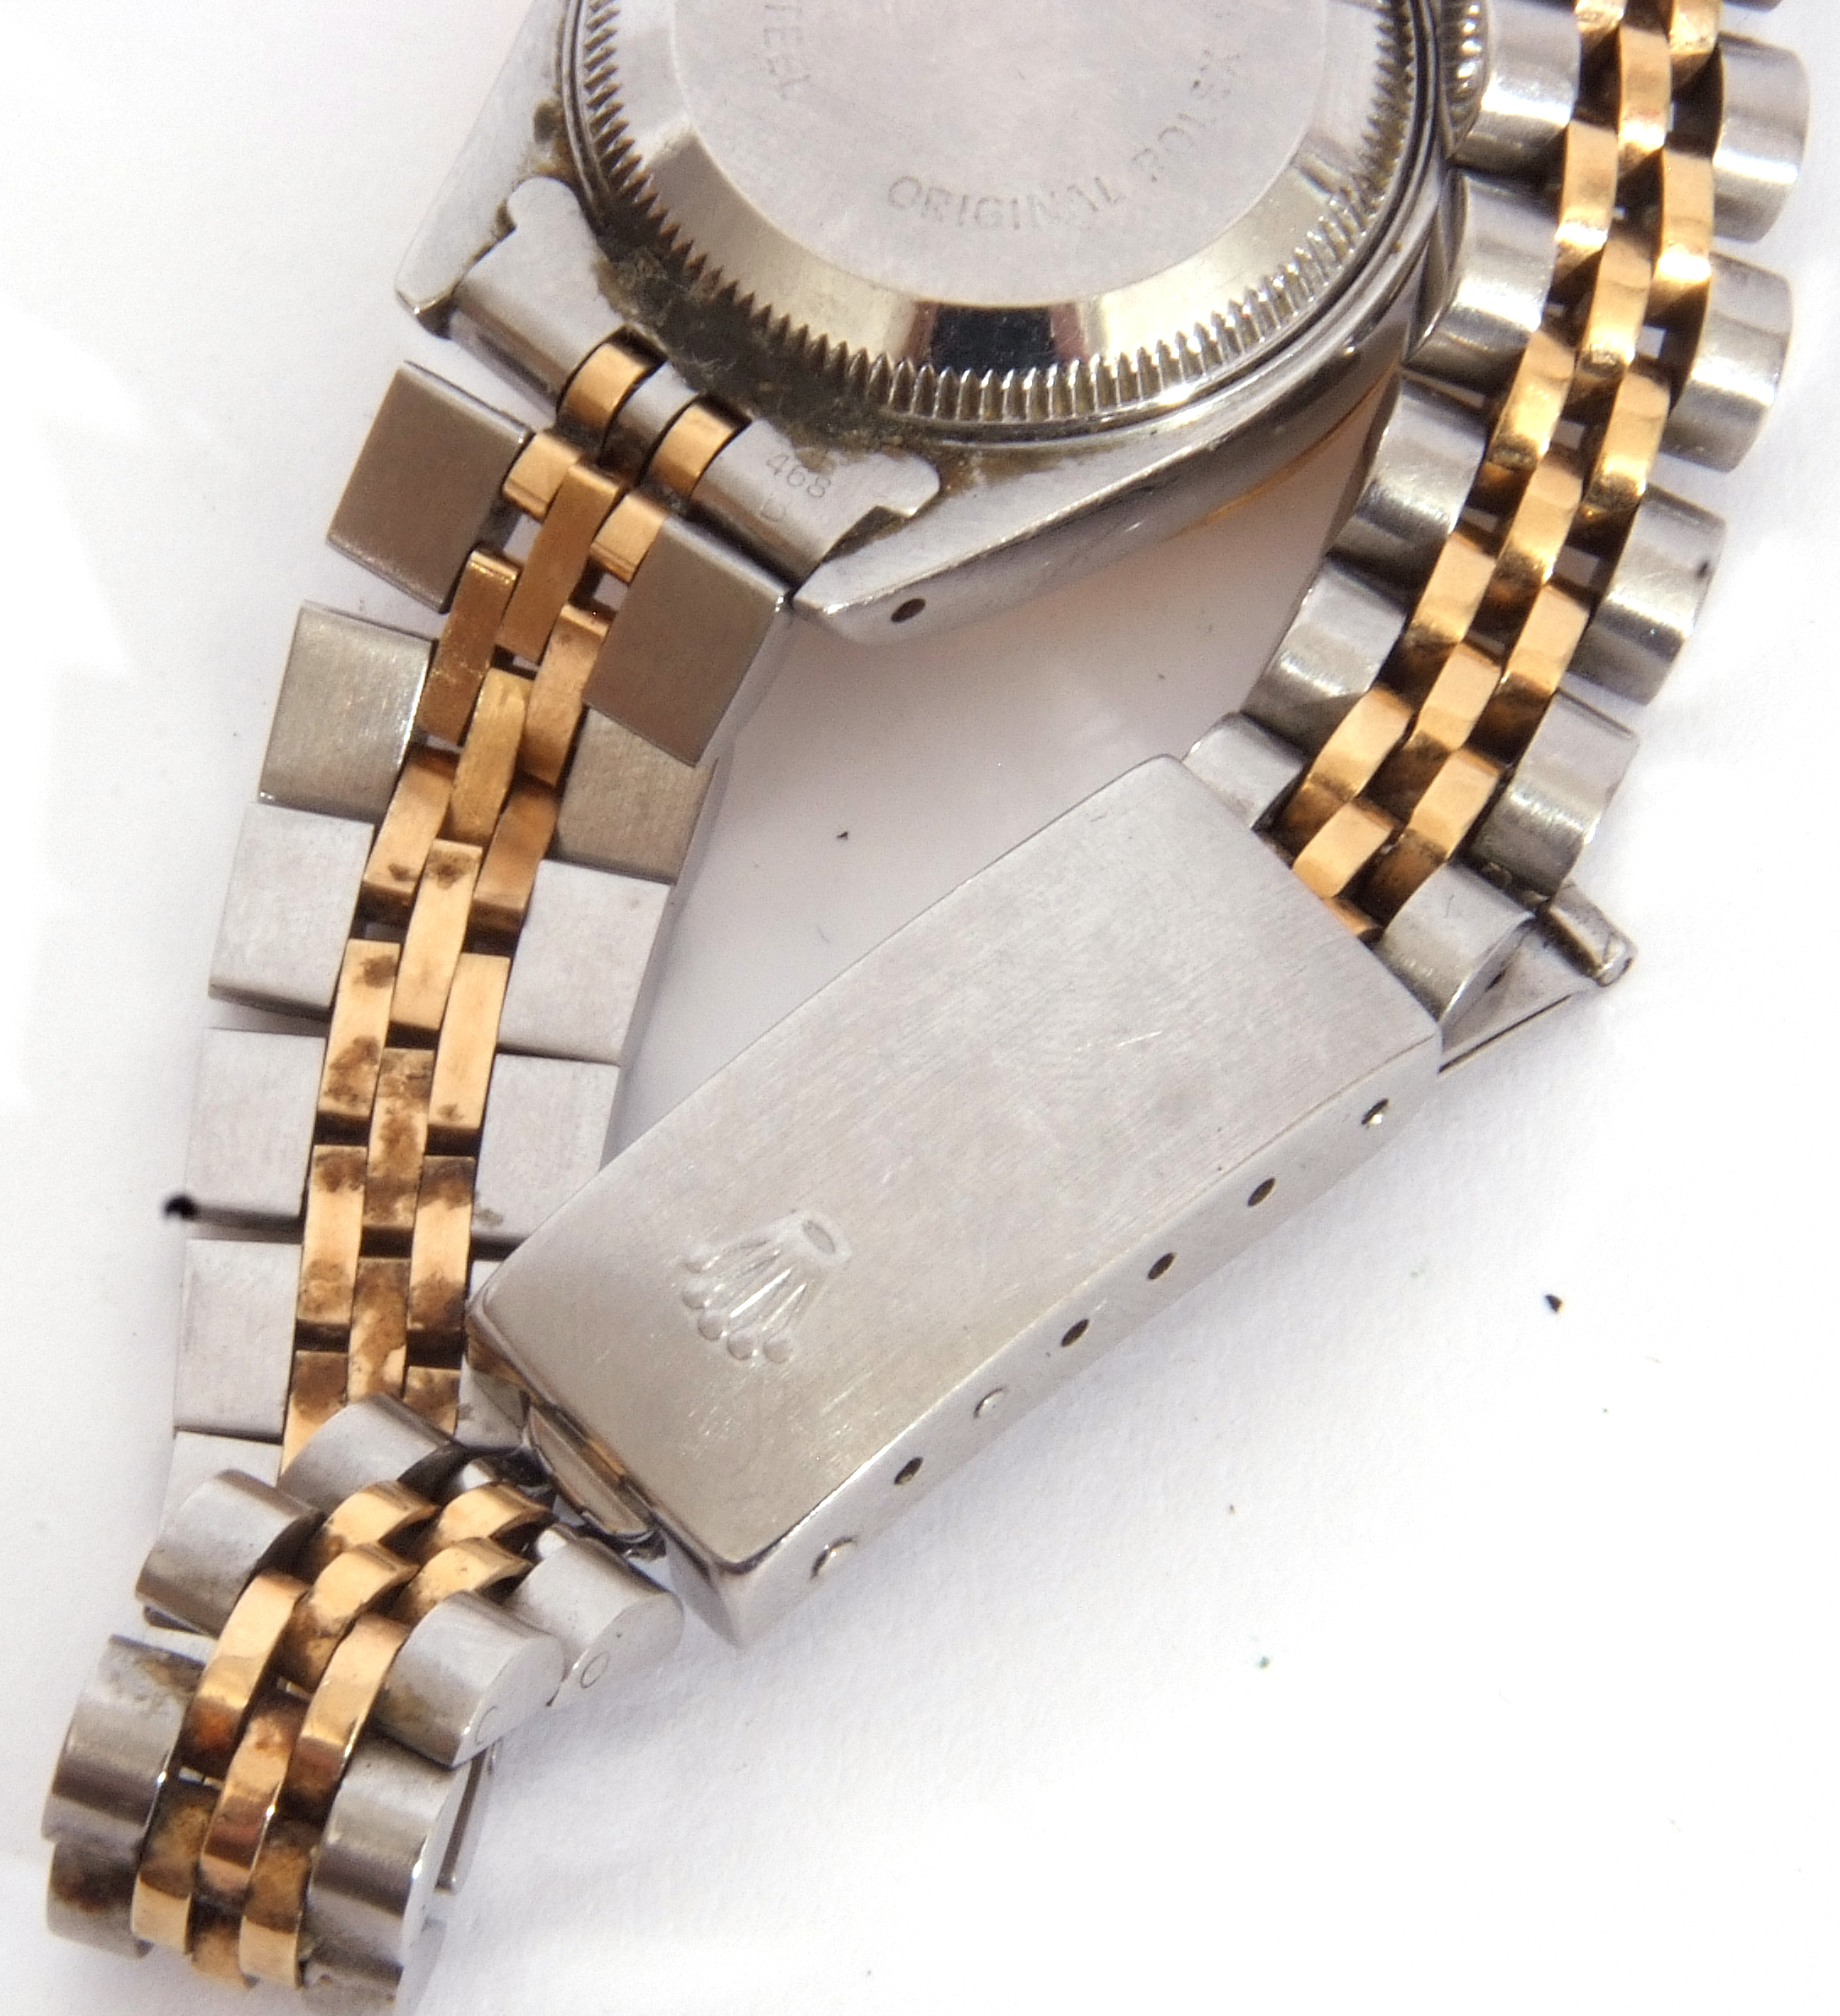 Ladies Rolex Oyster Perpetual Datejust, bi-metal fluted bezel watch with champagne dial, baton - Image 6 of 8